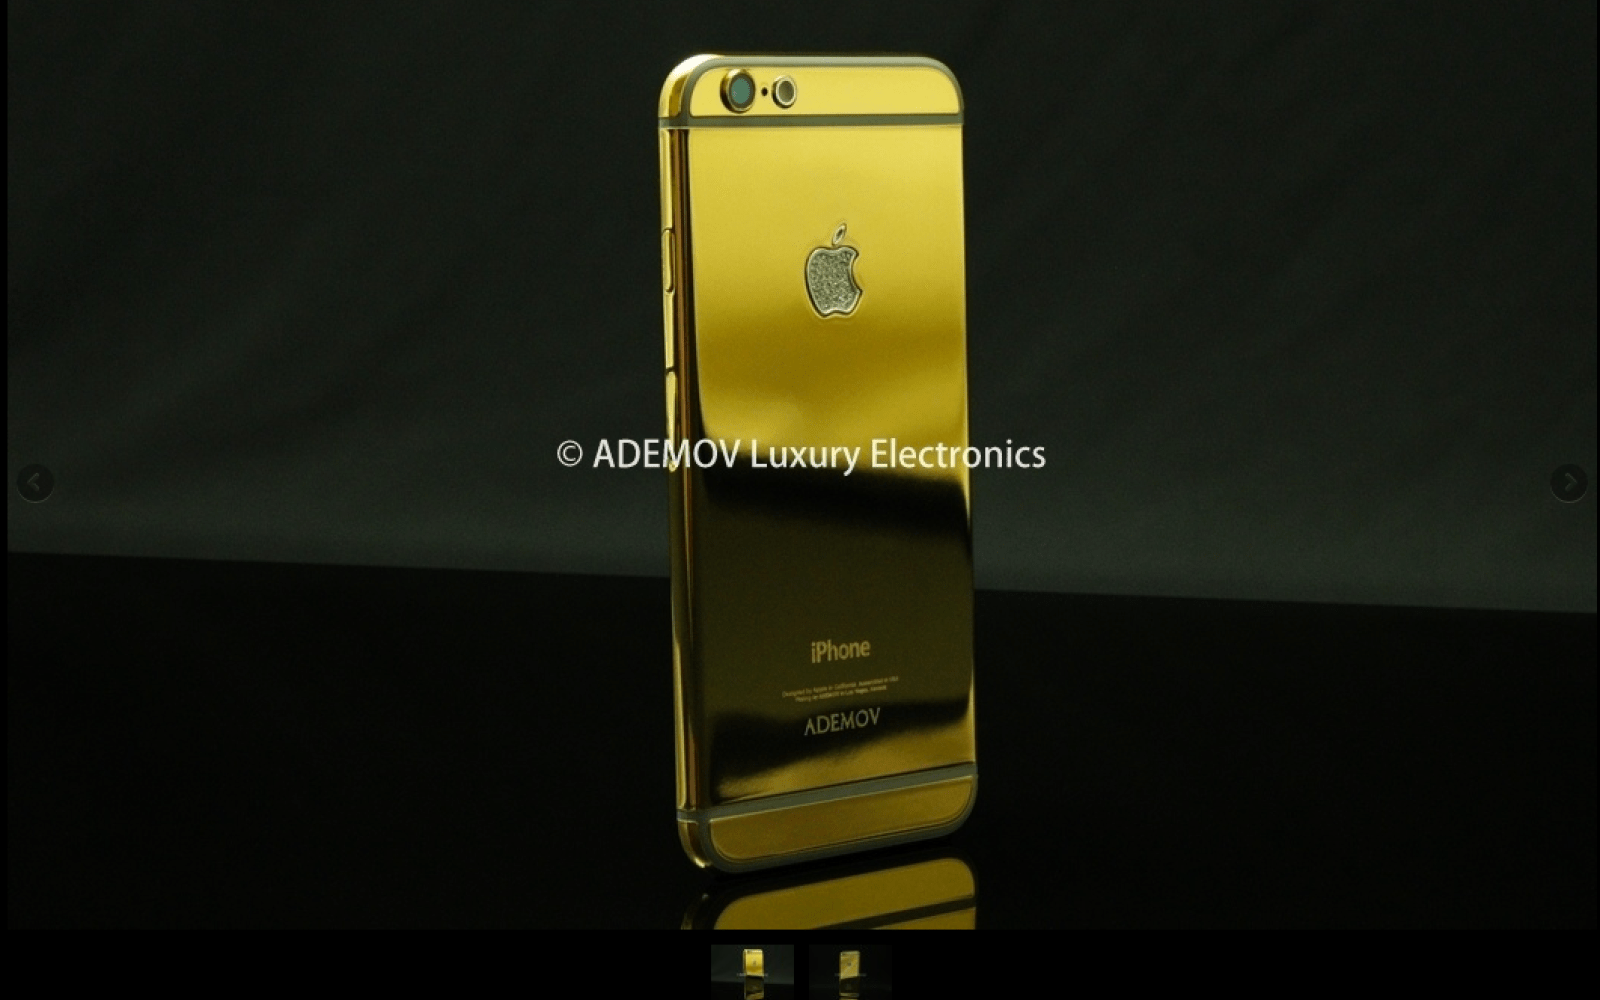 Gold and Diamond Apple Logo - Prove you're rich with this 24KT gold iPhone 6 with diamond Apple